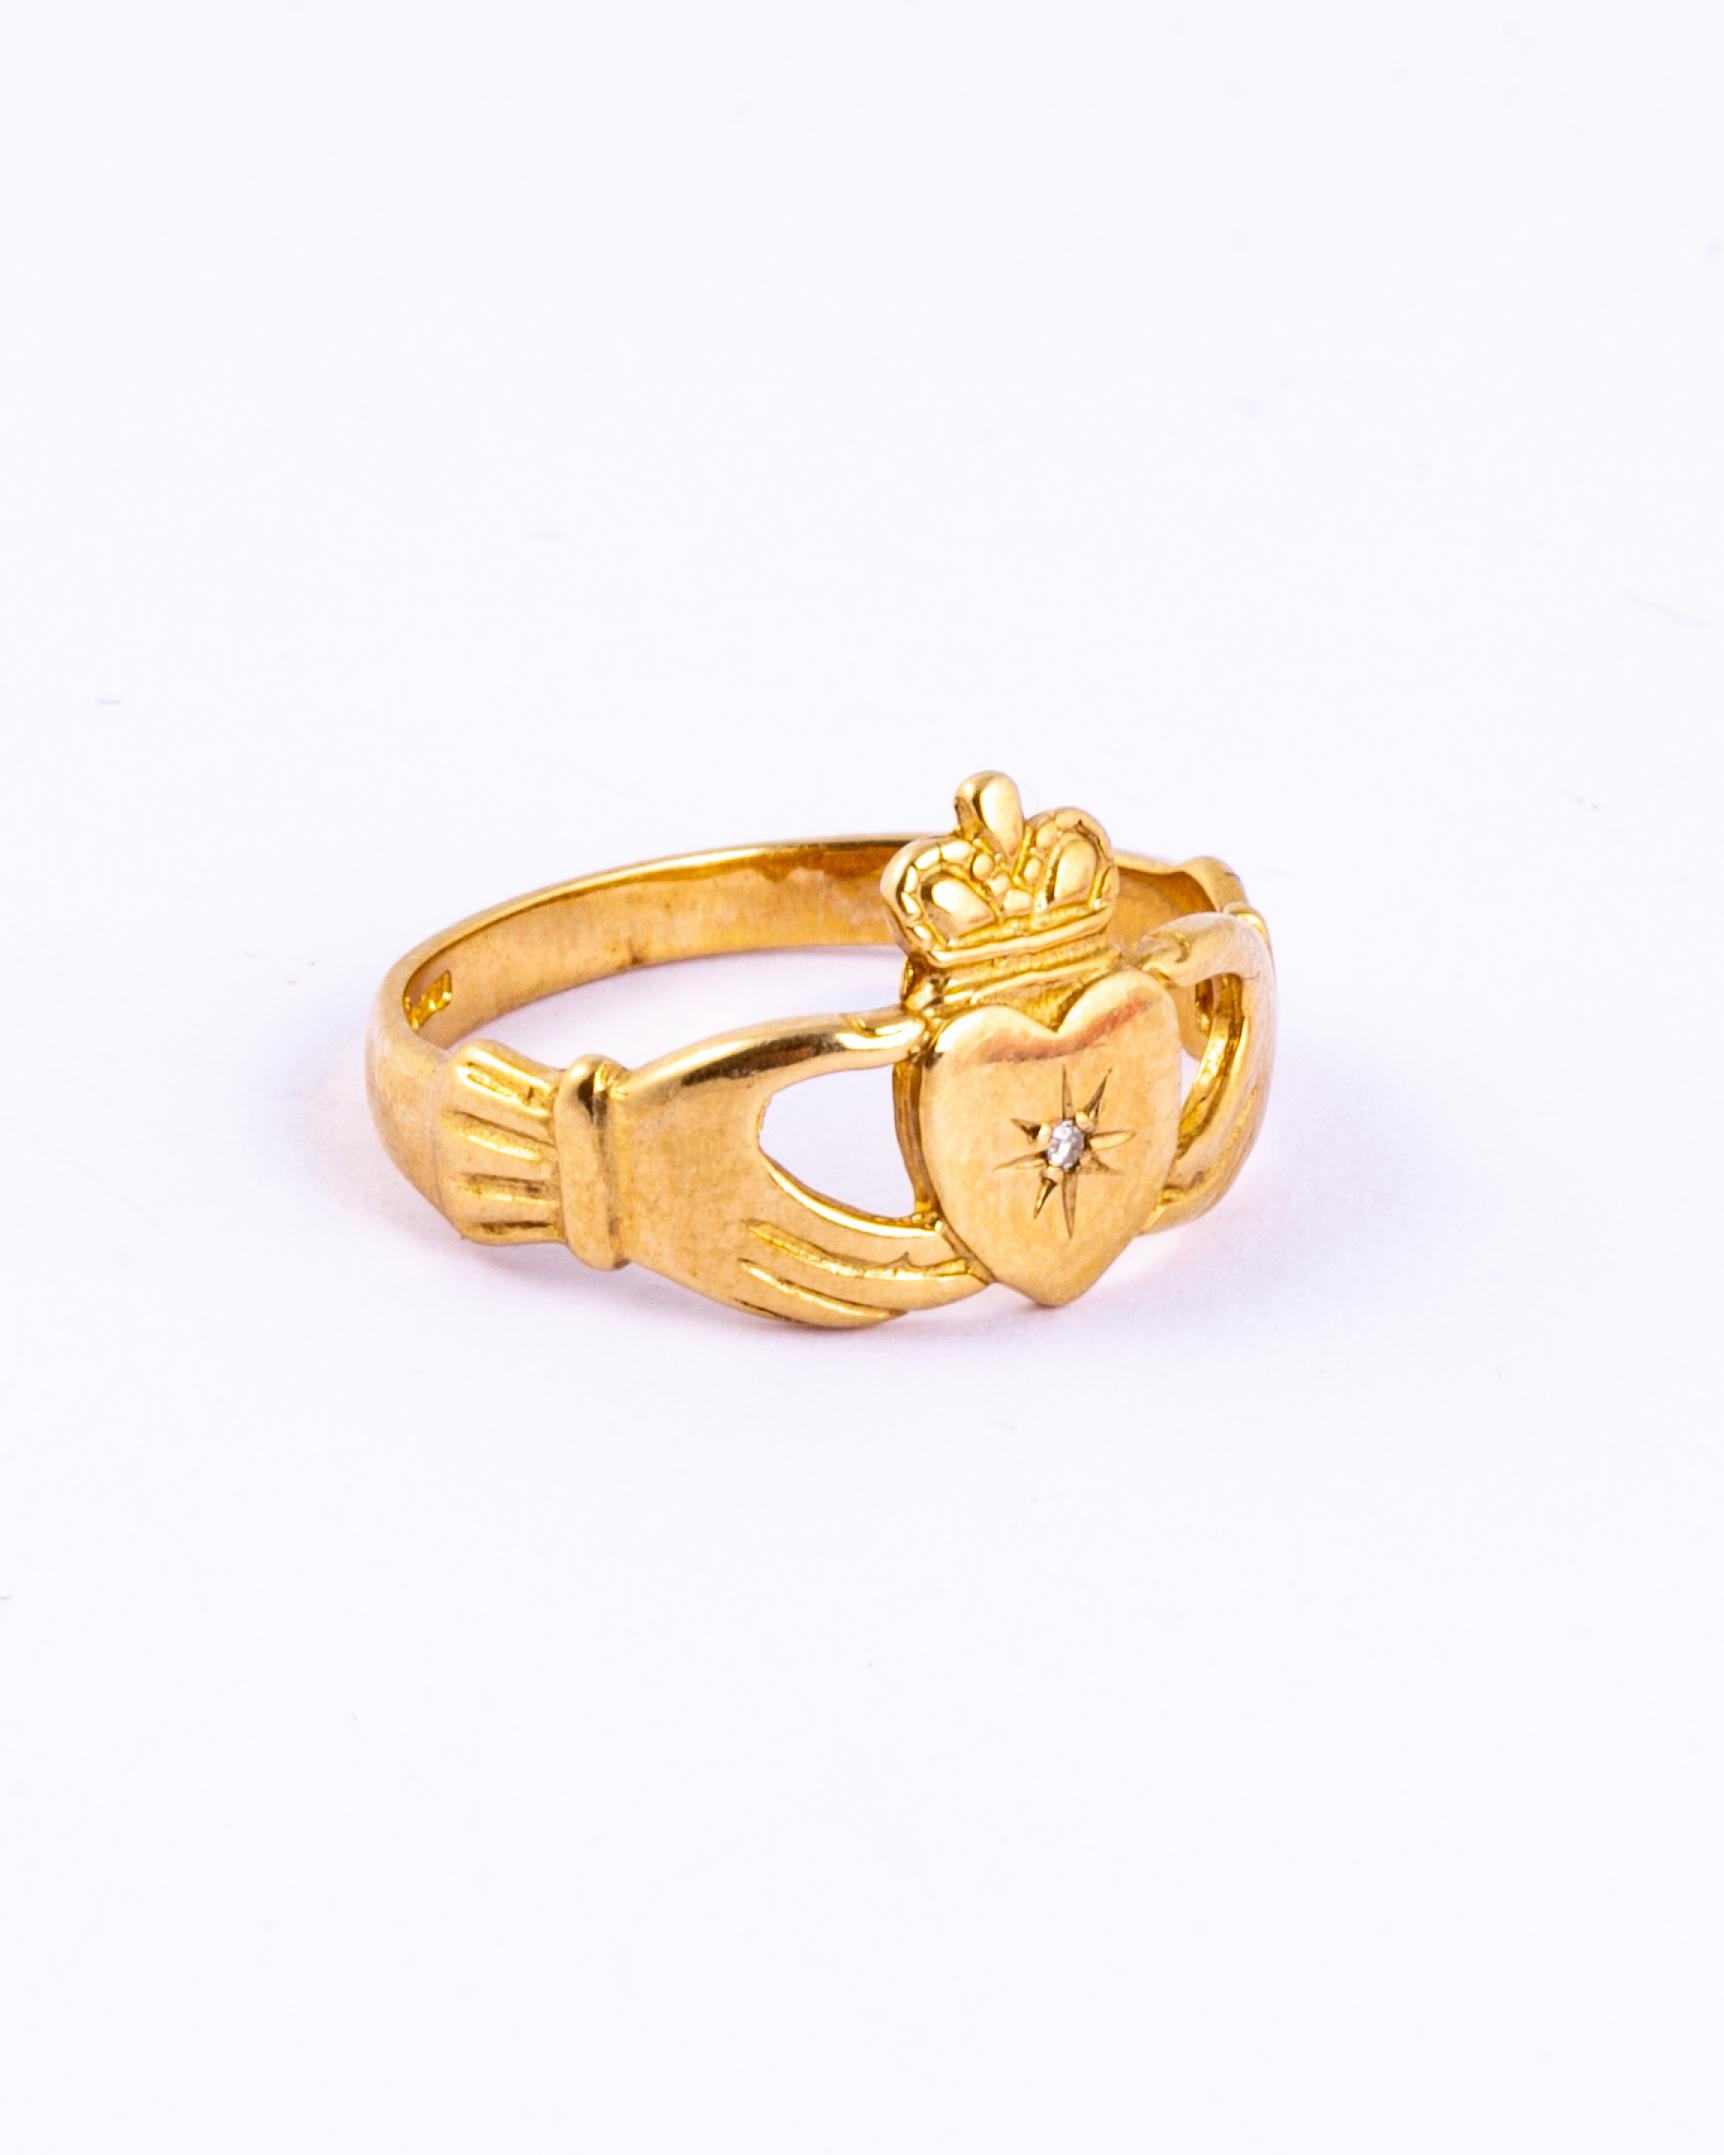 These claddagh rings are a traditional Irish ring which represents love, loyalty, and friendship. This one is set with a diamond point and modelled in 9ct gold. 

Ring Size: K 1/2 or 5 1/2 
Width: 11mm

Weight: 2g